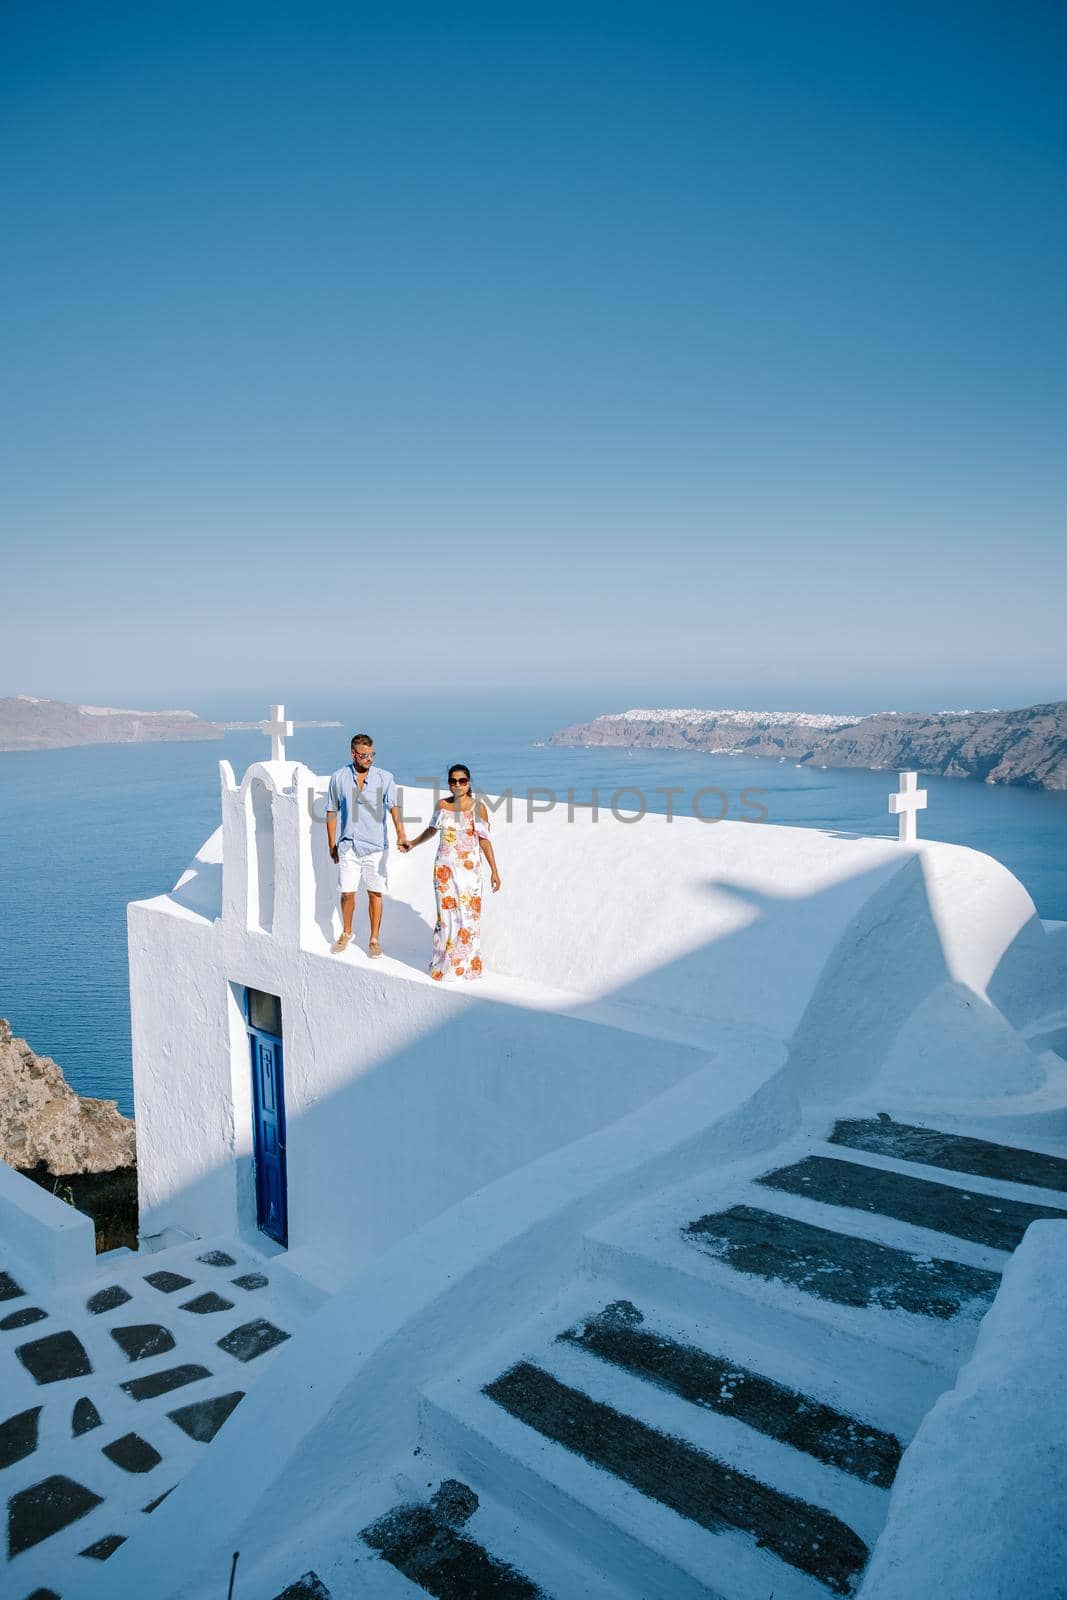 couple visit Skaros rock Fira,Santorini Greece, young couple on luxury vacation at the Island of Santorini watching sunrise by the blue dome church and whitewashed village of Oia Santorini Greece . Europe